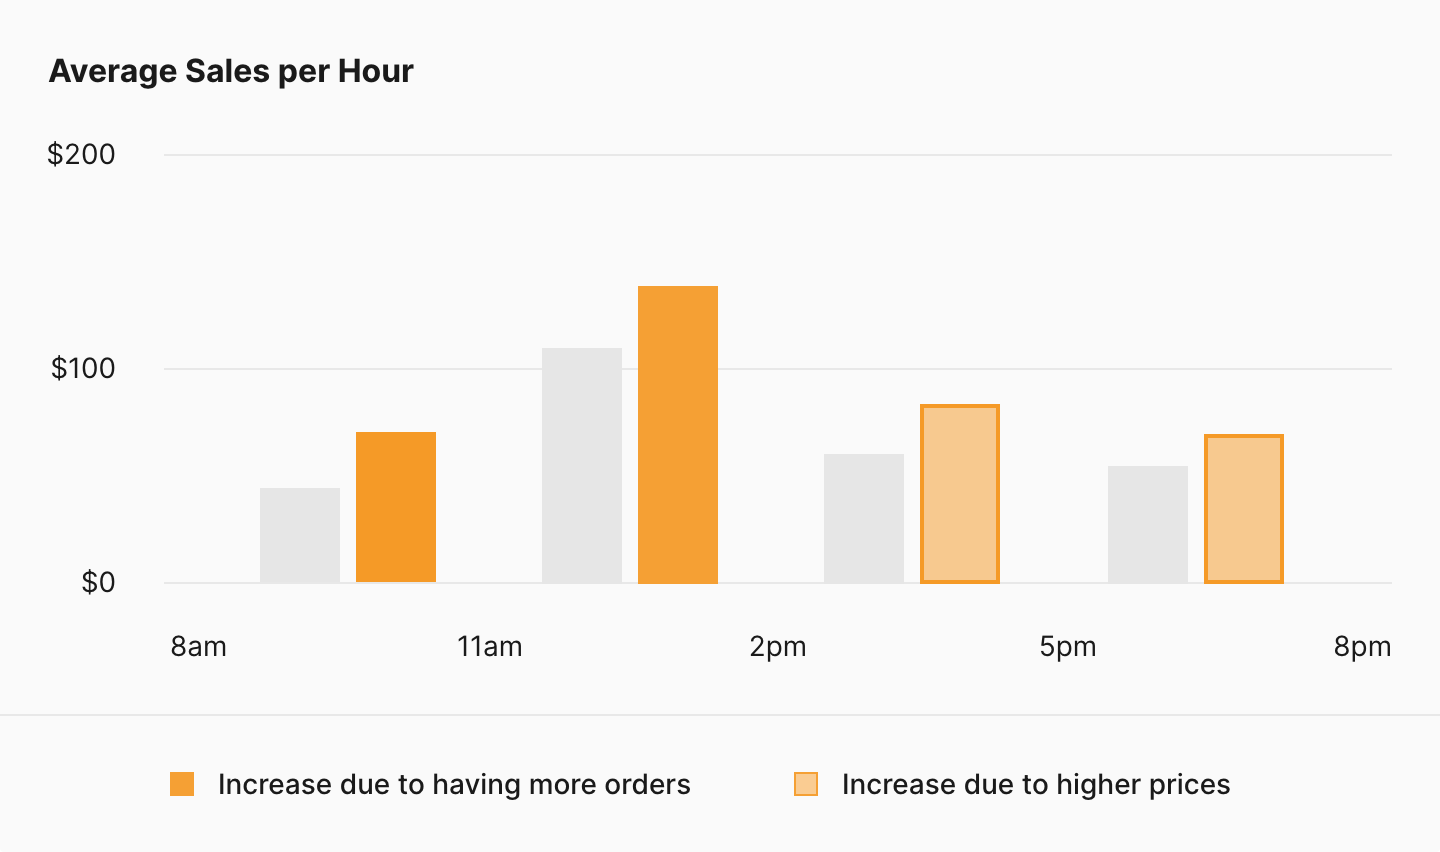 Bar Graph showing increased average sales per hour due to more orders and higer prices